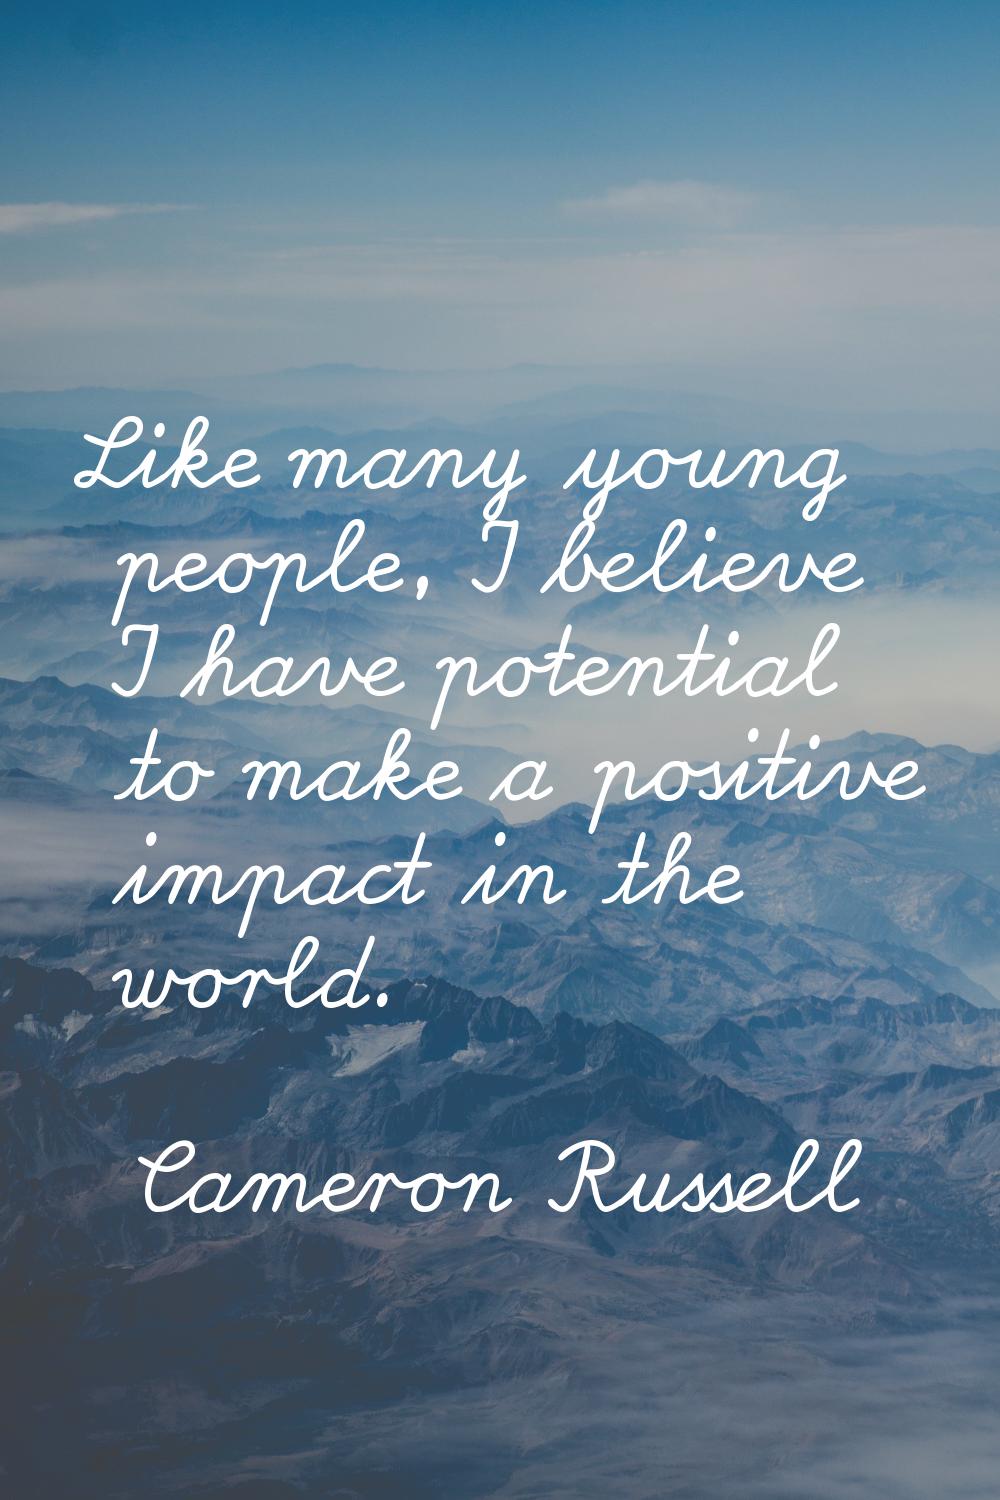 Like many young people, I believe I have potential to make a positive impact in the world.